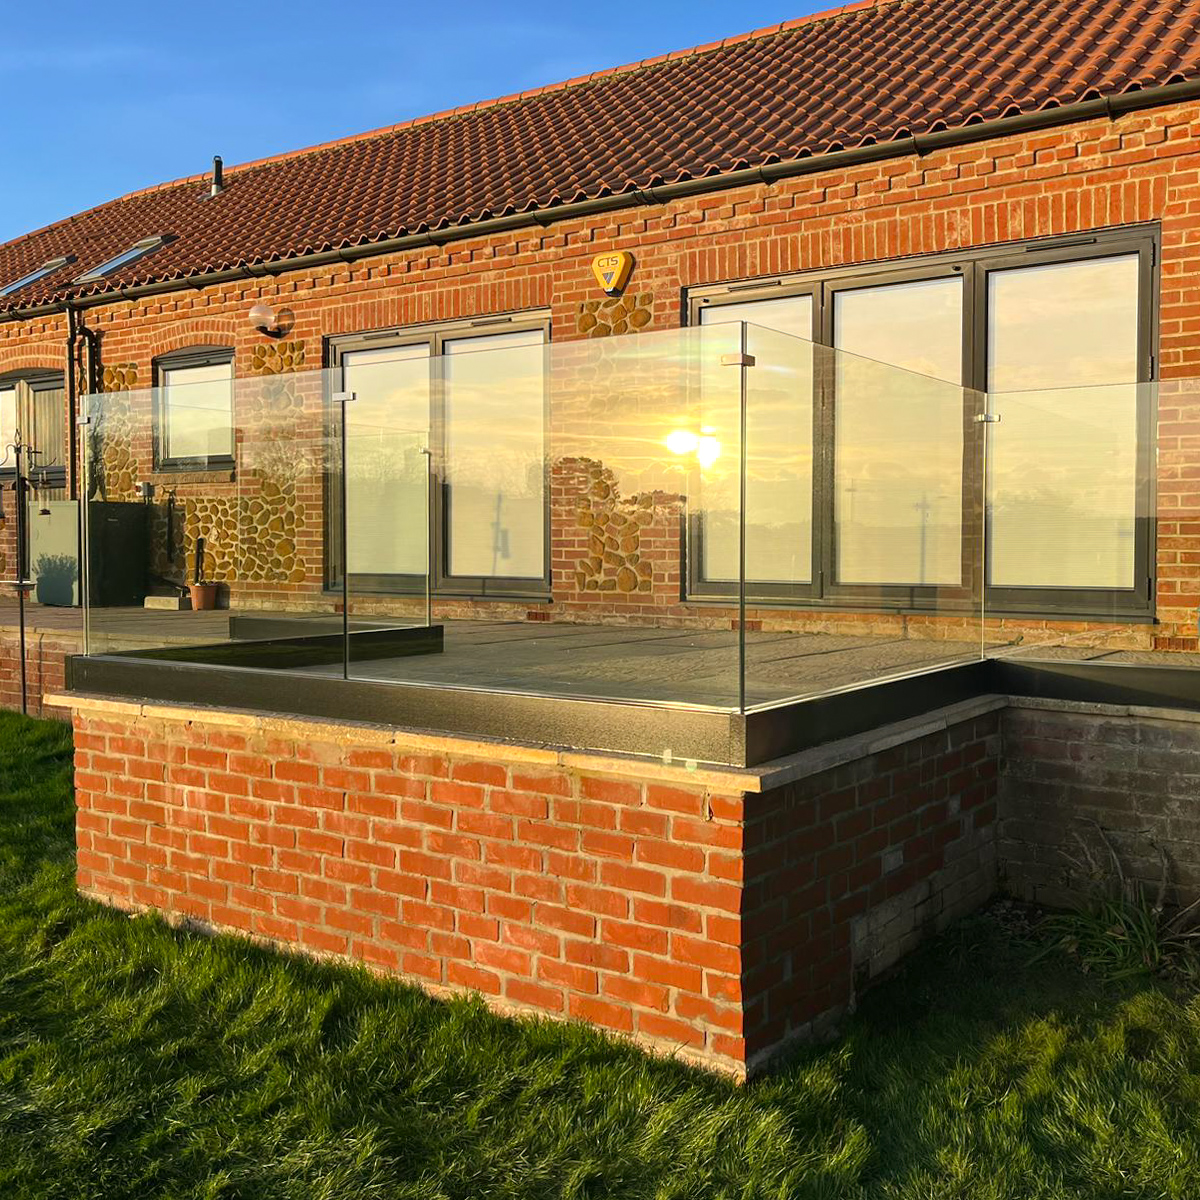 glass balustrade surrounding patio at the back of the house in the golden hour sun